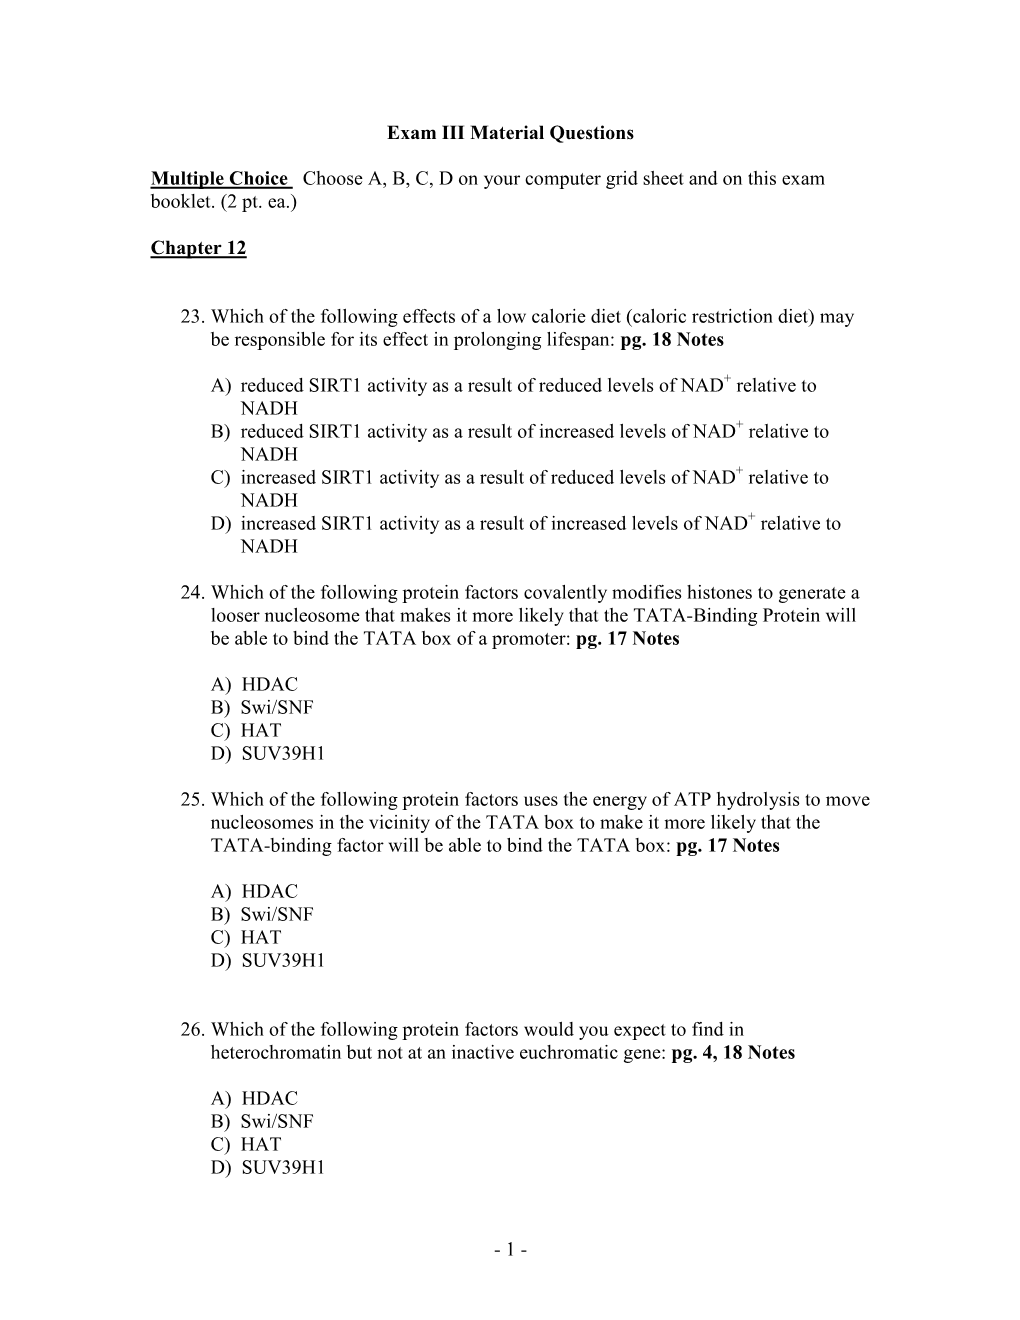 Exam III Material Questions Multiple Choice Choose A, B, C, D on Your